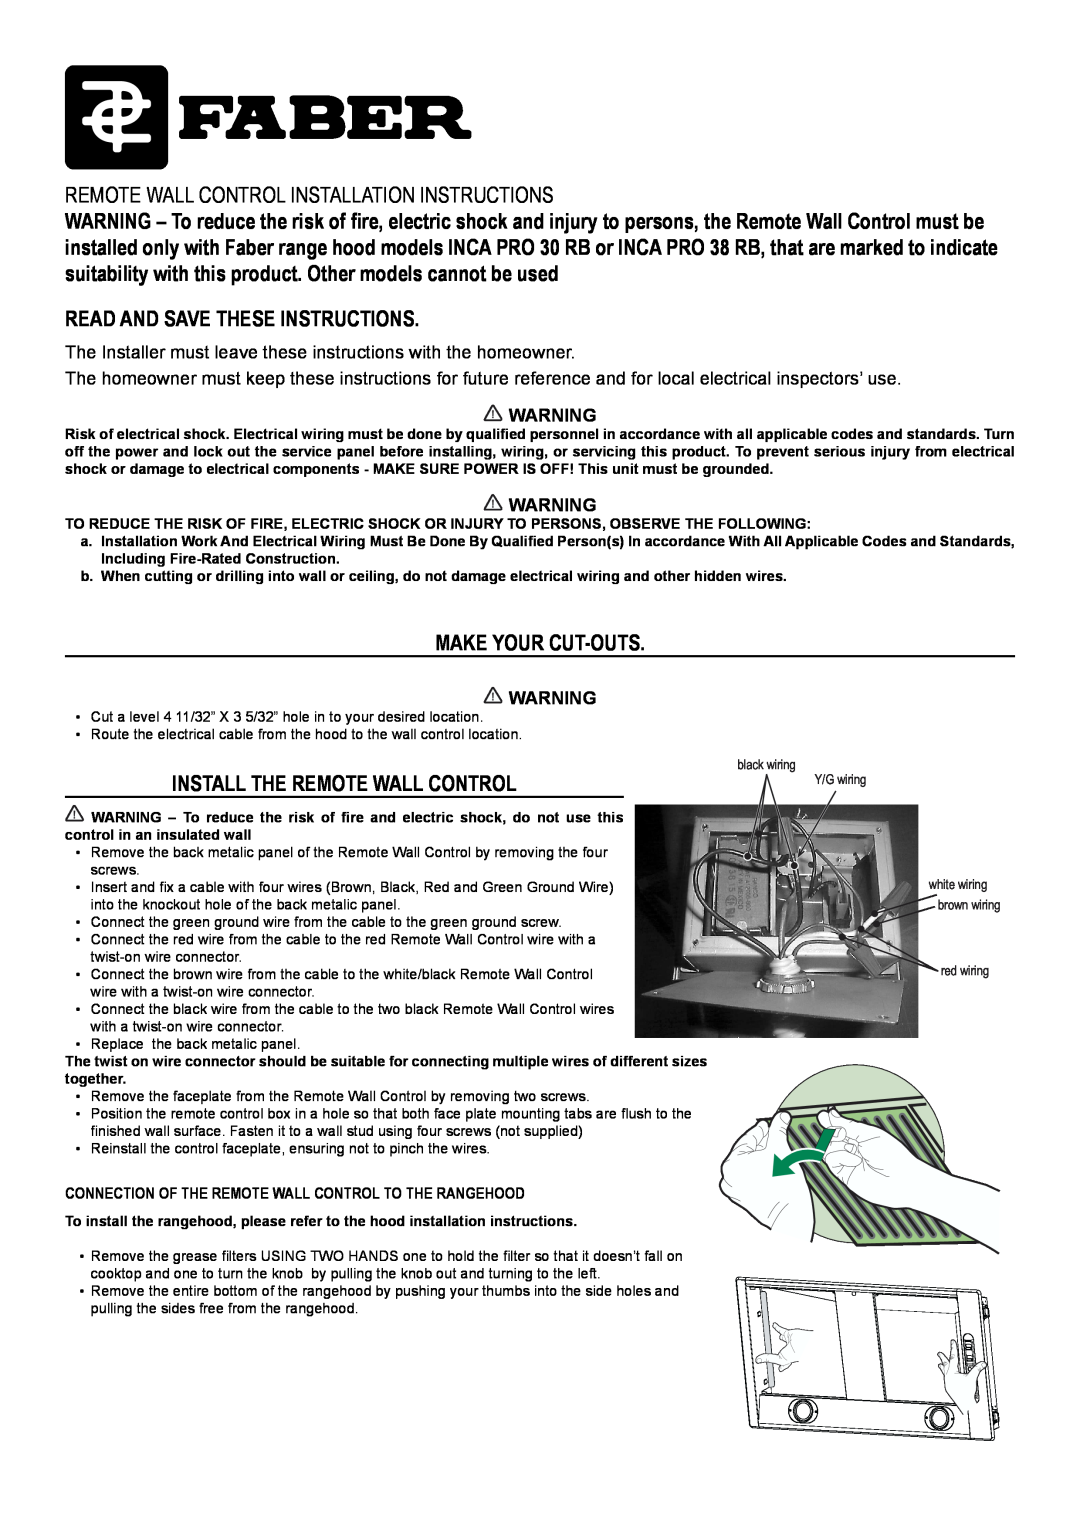 Faber INCA PRO 30 RB installation instructions Read And Save These Instructions, Make Your Cut-Outs 